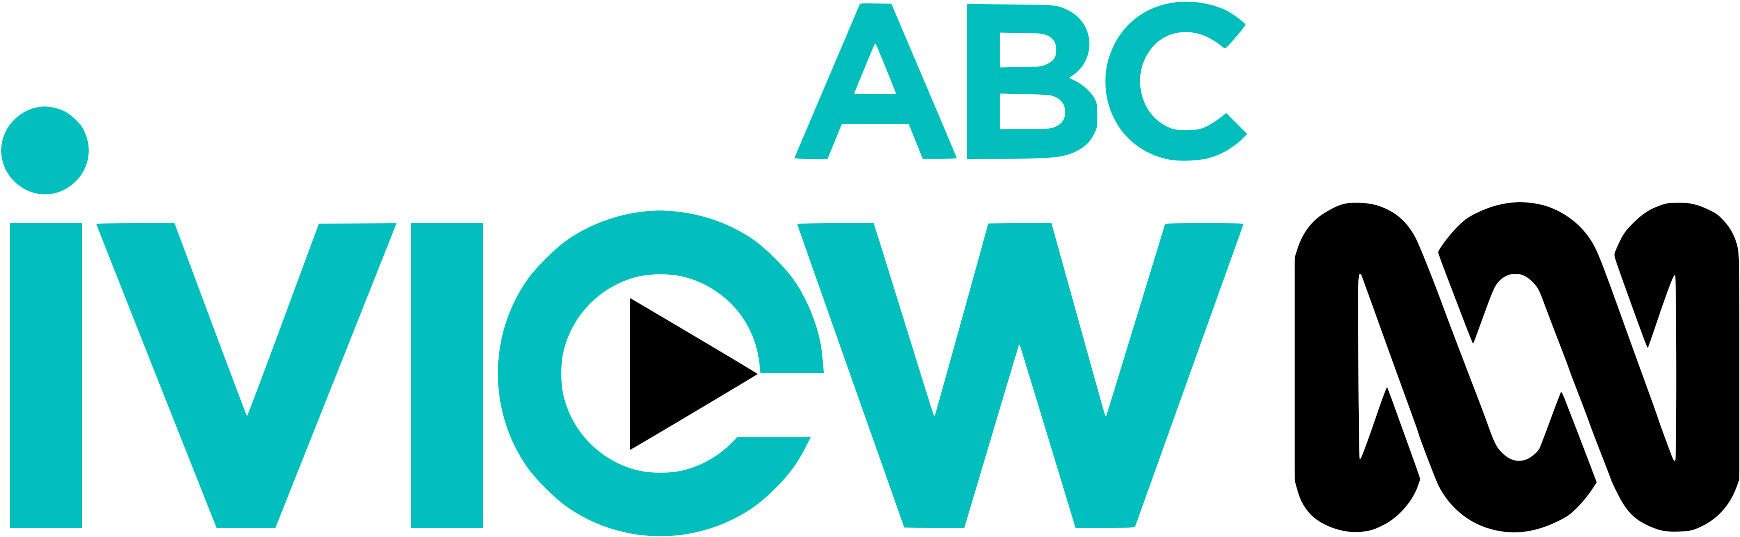 Abc Iview - Abc Iview Logo (1762x560), Png Download.